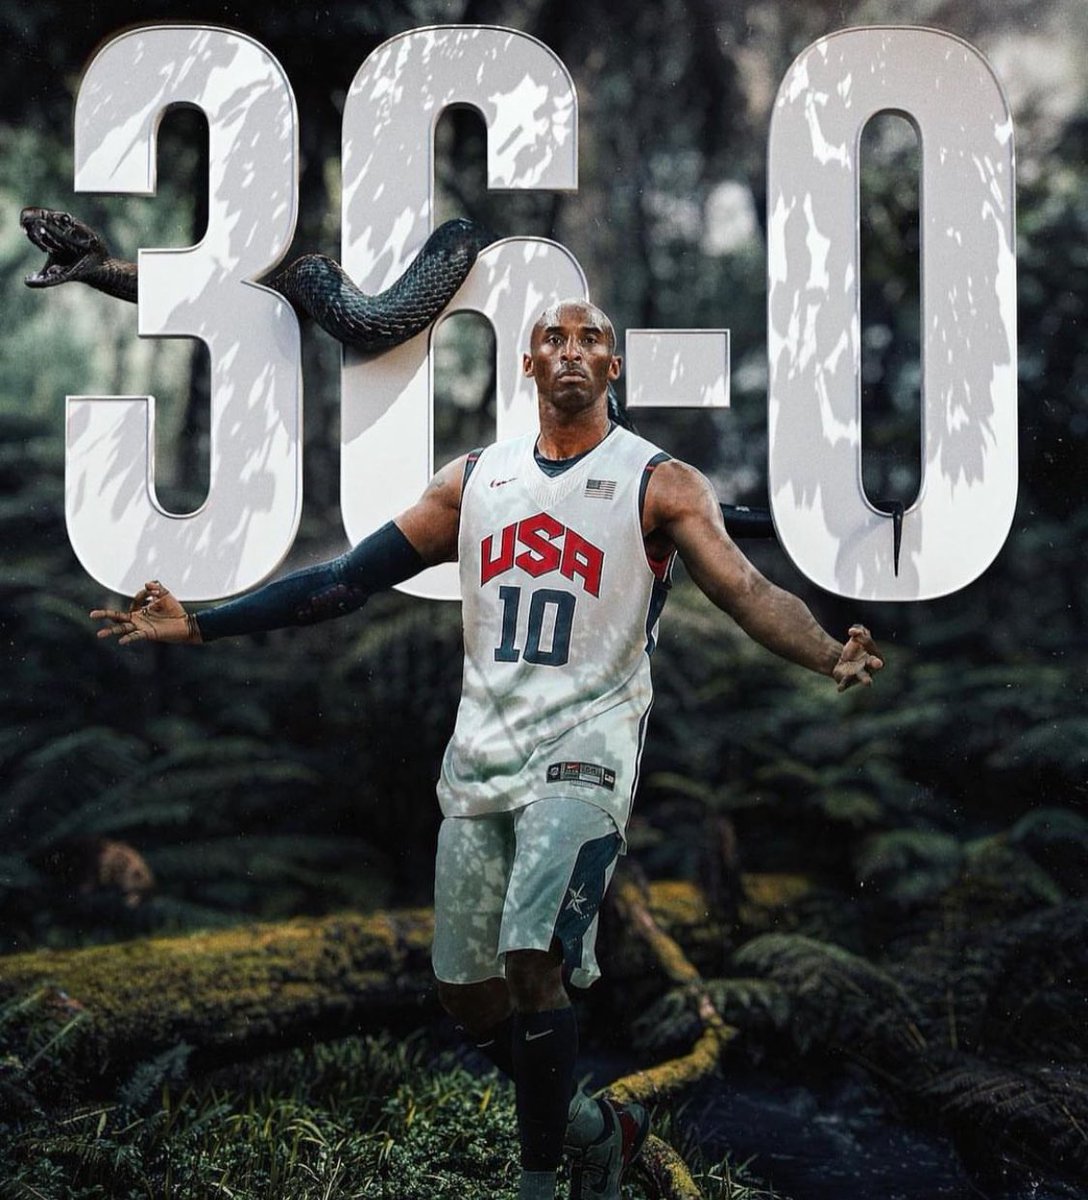 Friendly reminder, Kobe Bryant had an overall record of 36-0 playing for USA Basketball. 16-0 in the Olympics 10-0 in the FIBA Americas 10-0 in Exhibitions